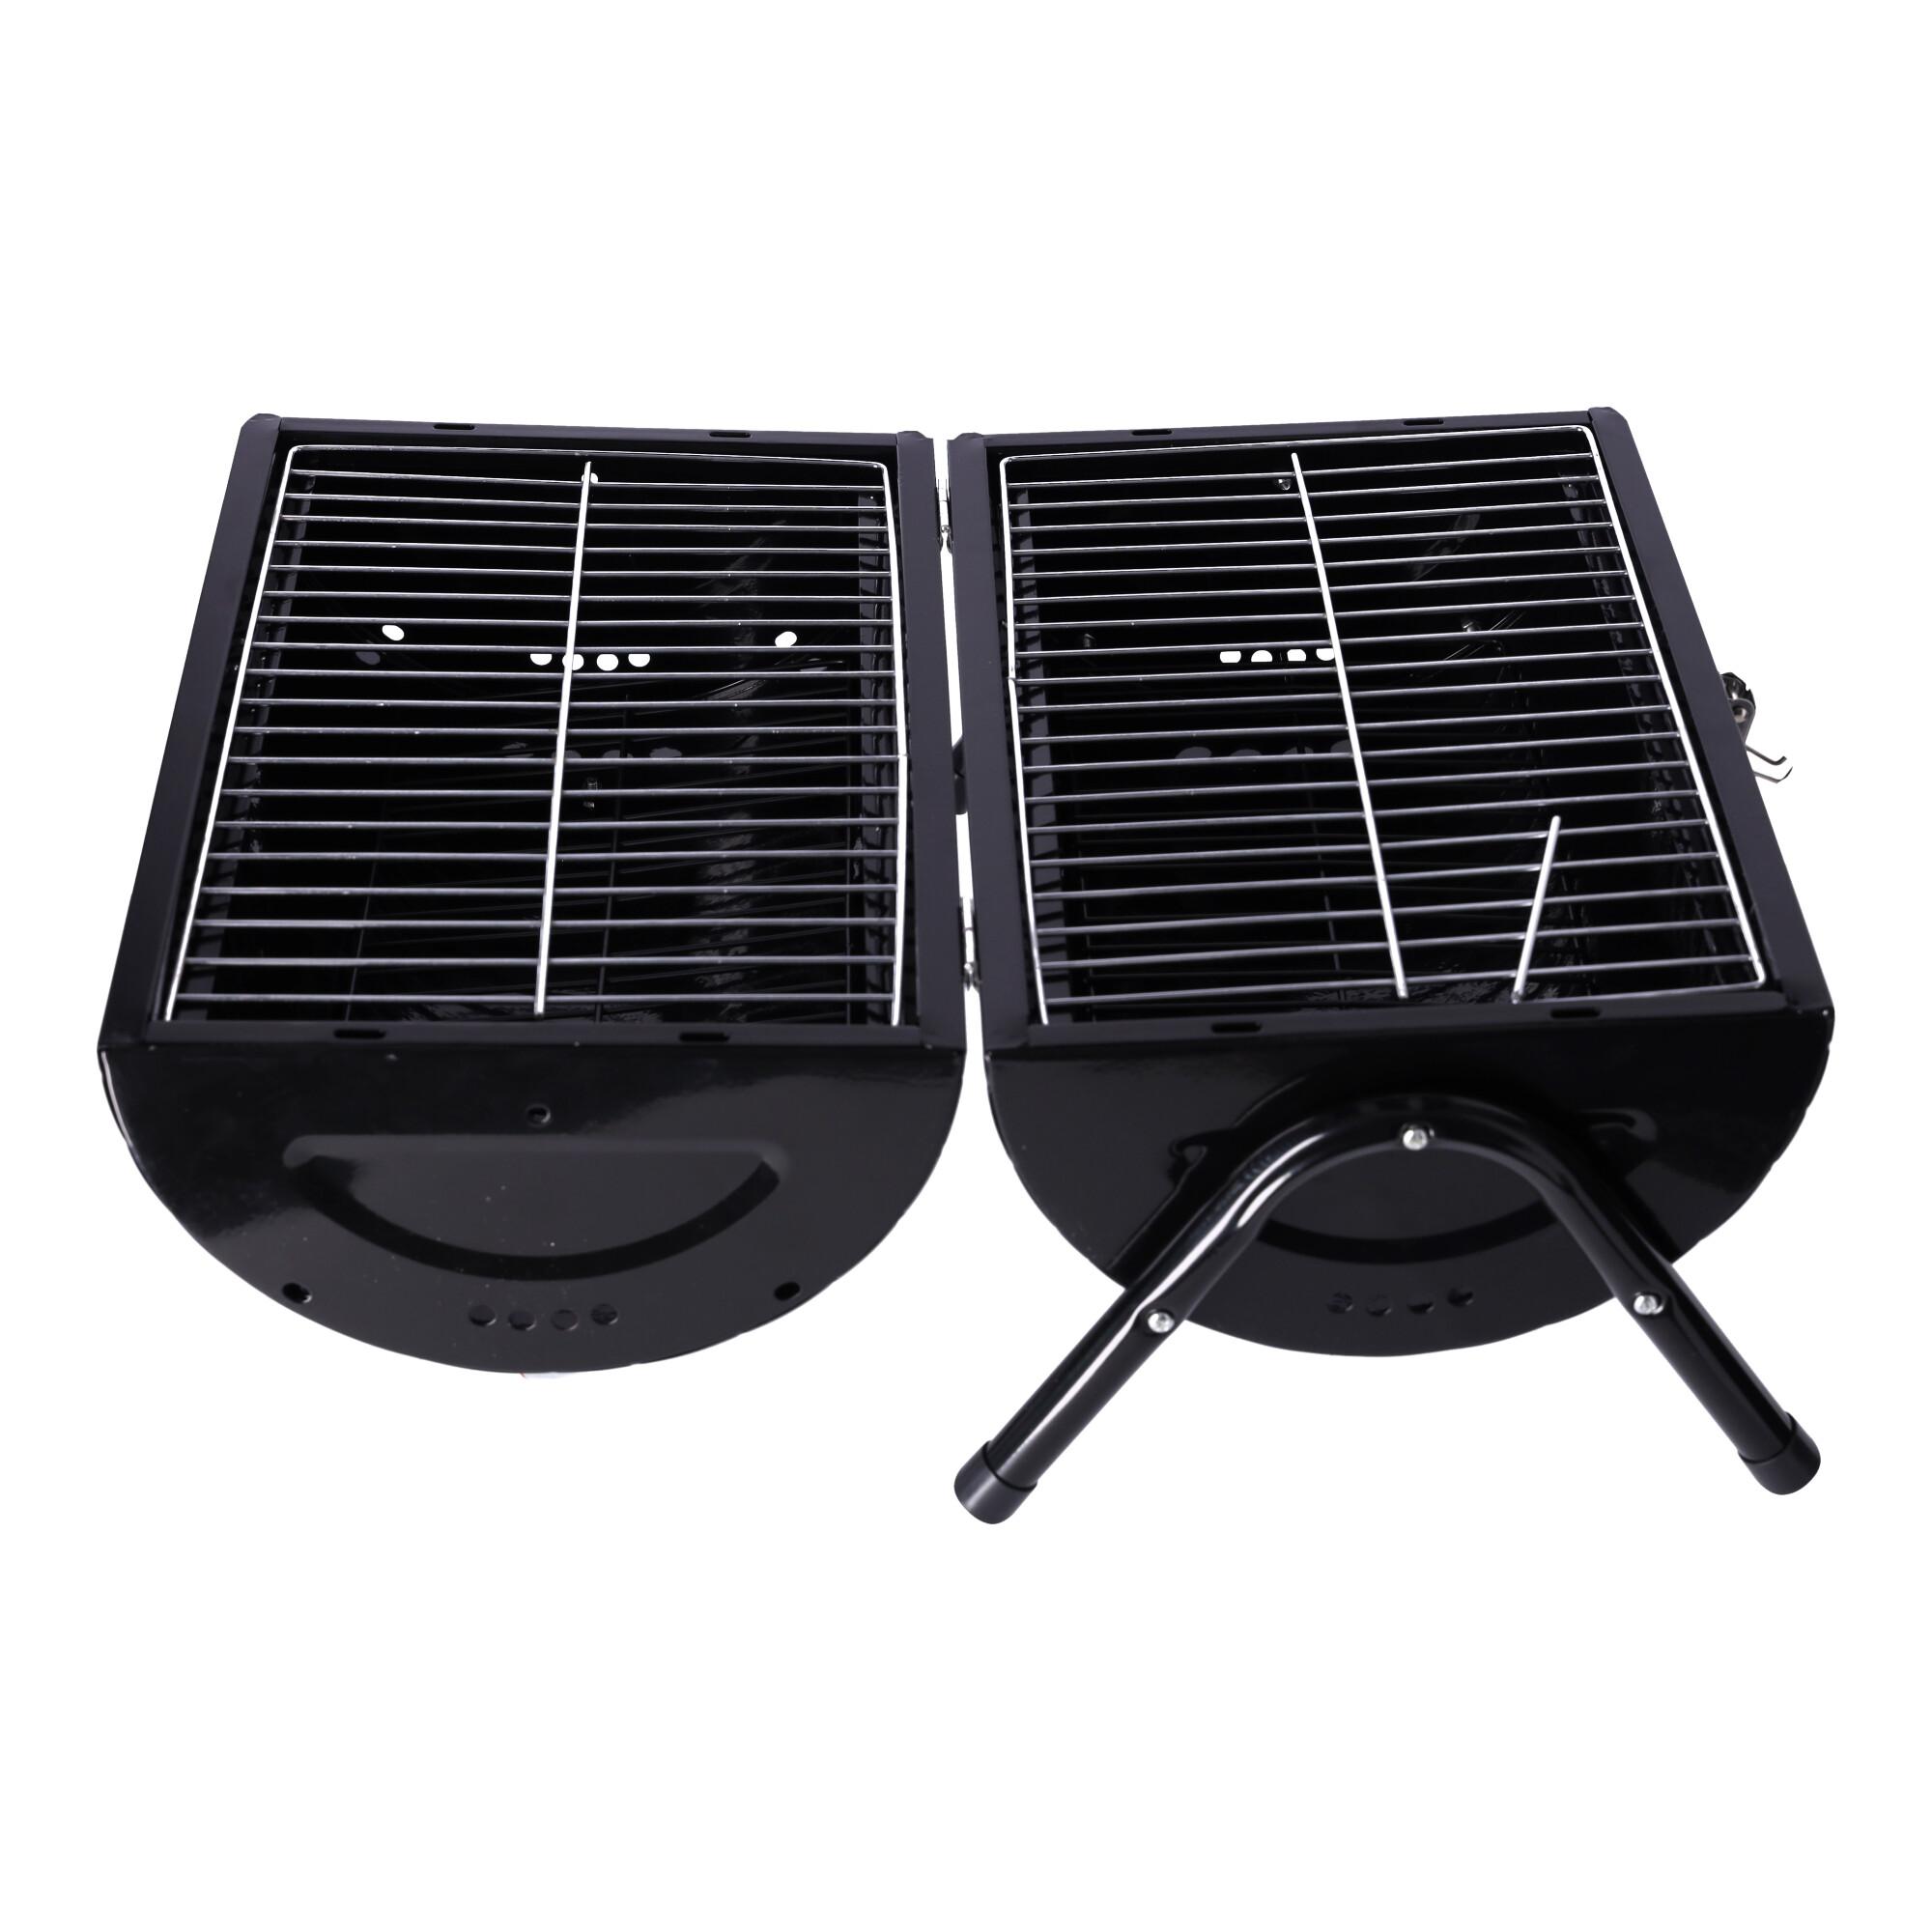 The infectious camping grill-black